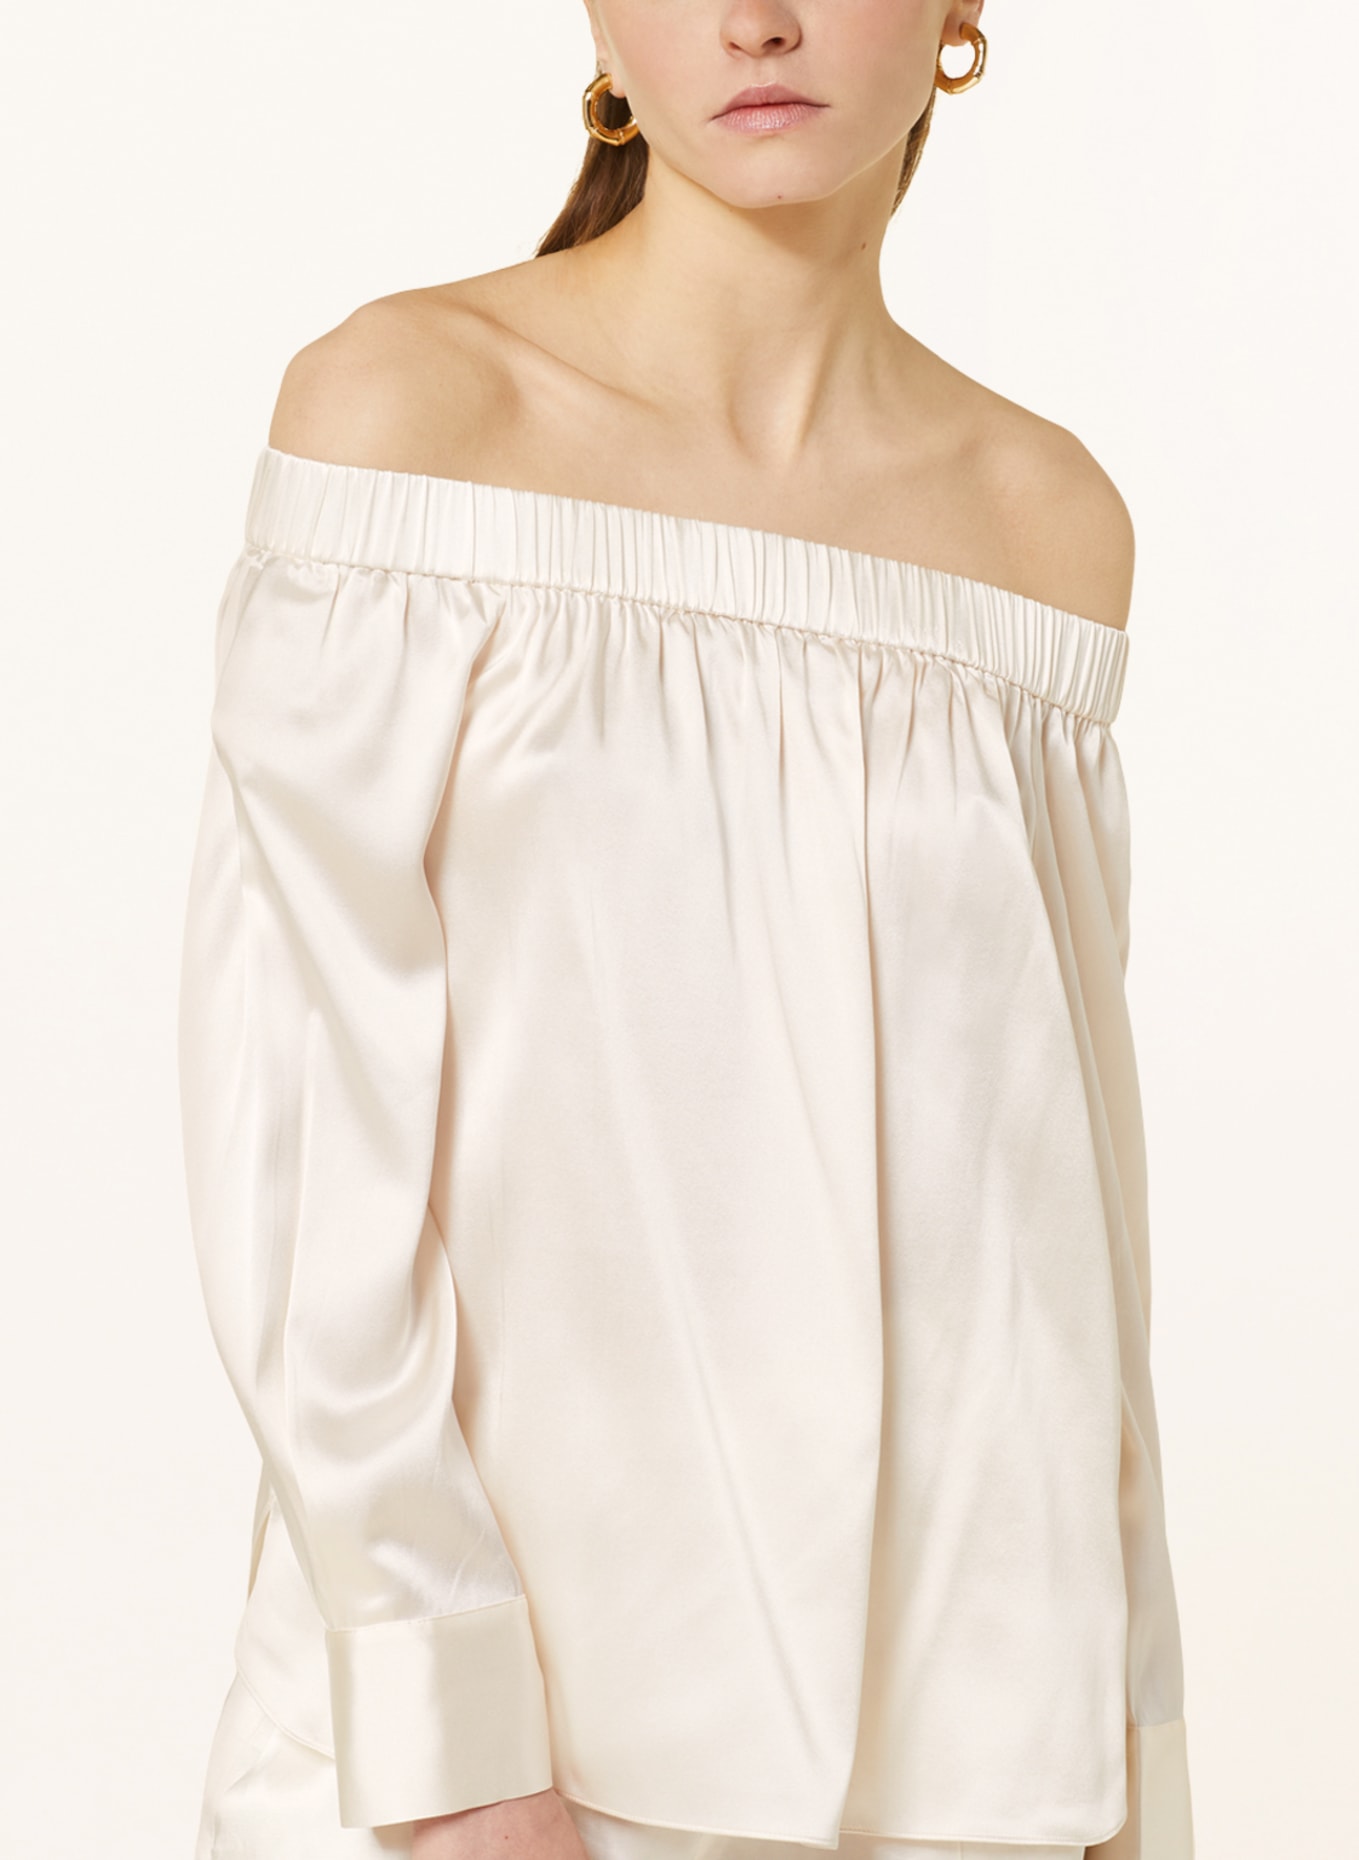 MRS & HUGS Off-the-shoulder blouse made of silk, Color: CREAM (Image 4)